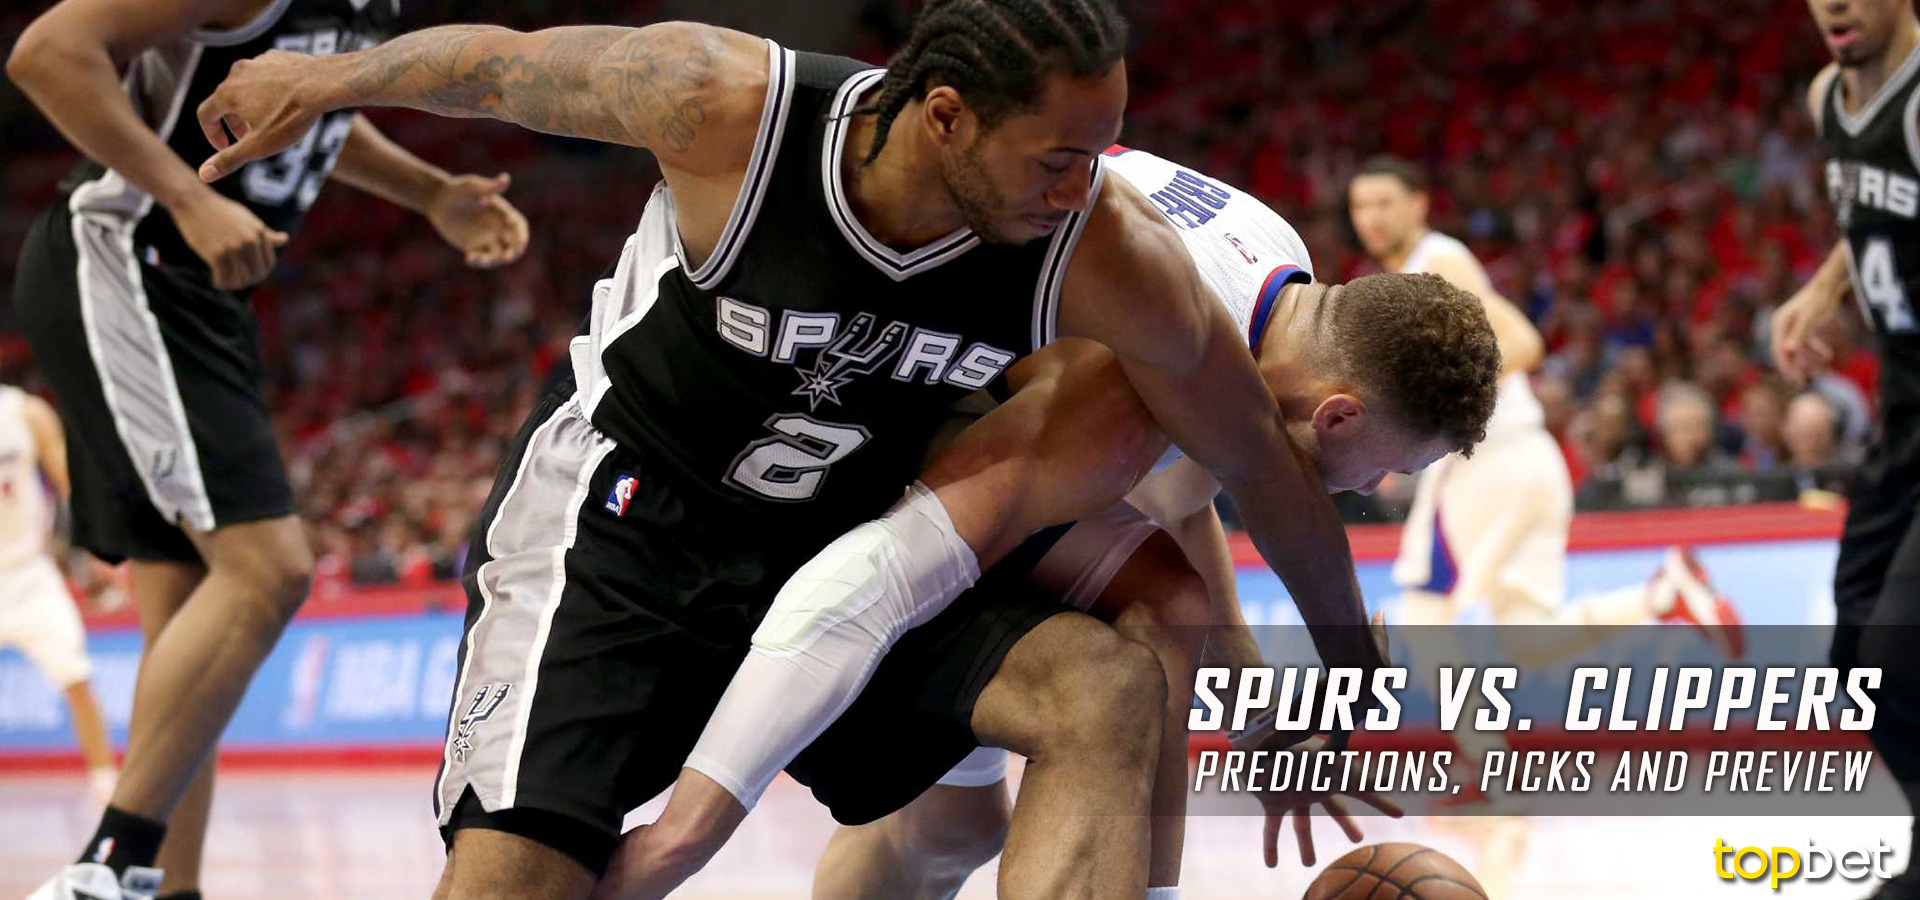 Spurs vs Clippers Predictions and Preview – February 20171920 x 900